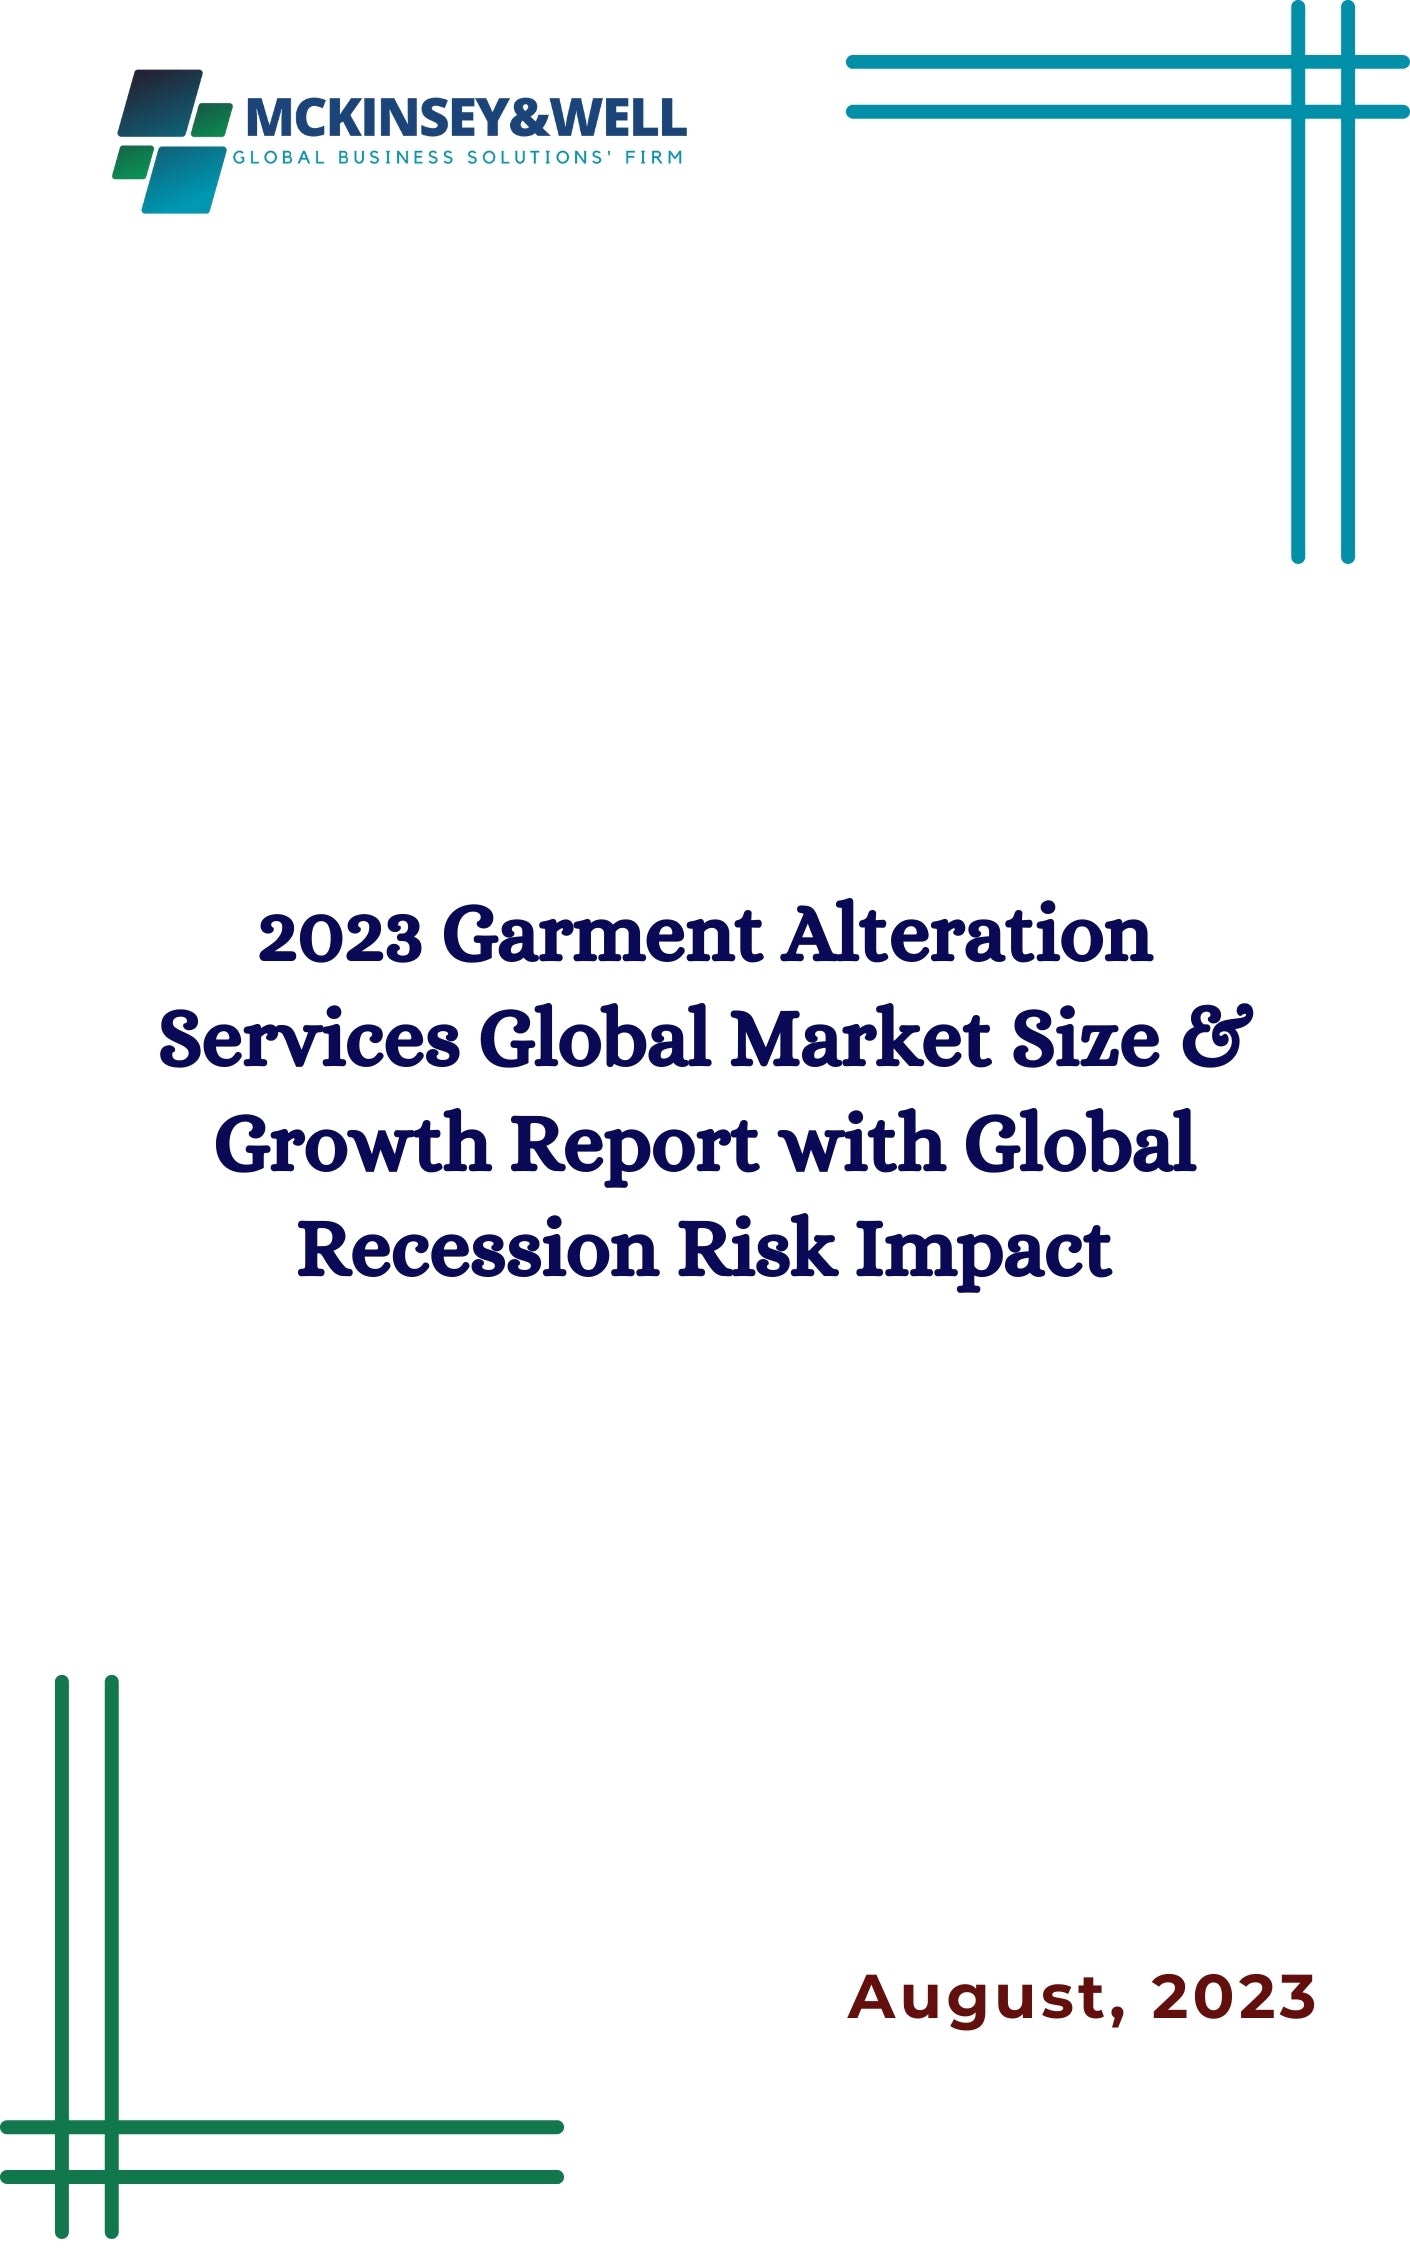 2023 Garment Alteration Services Global Market Size & Growth Report with Global Recession Risk Impact